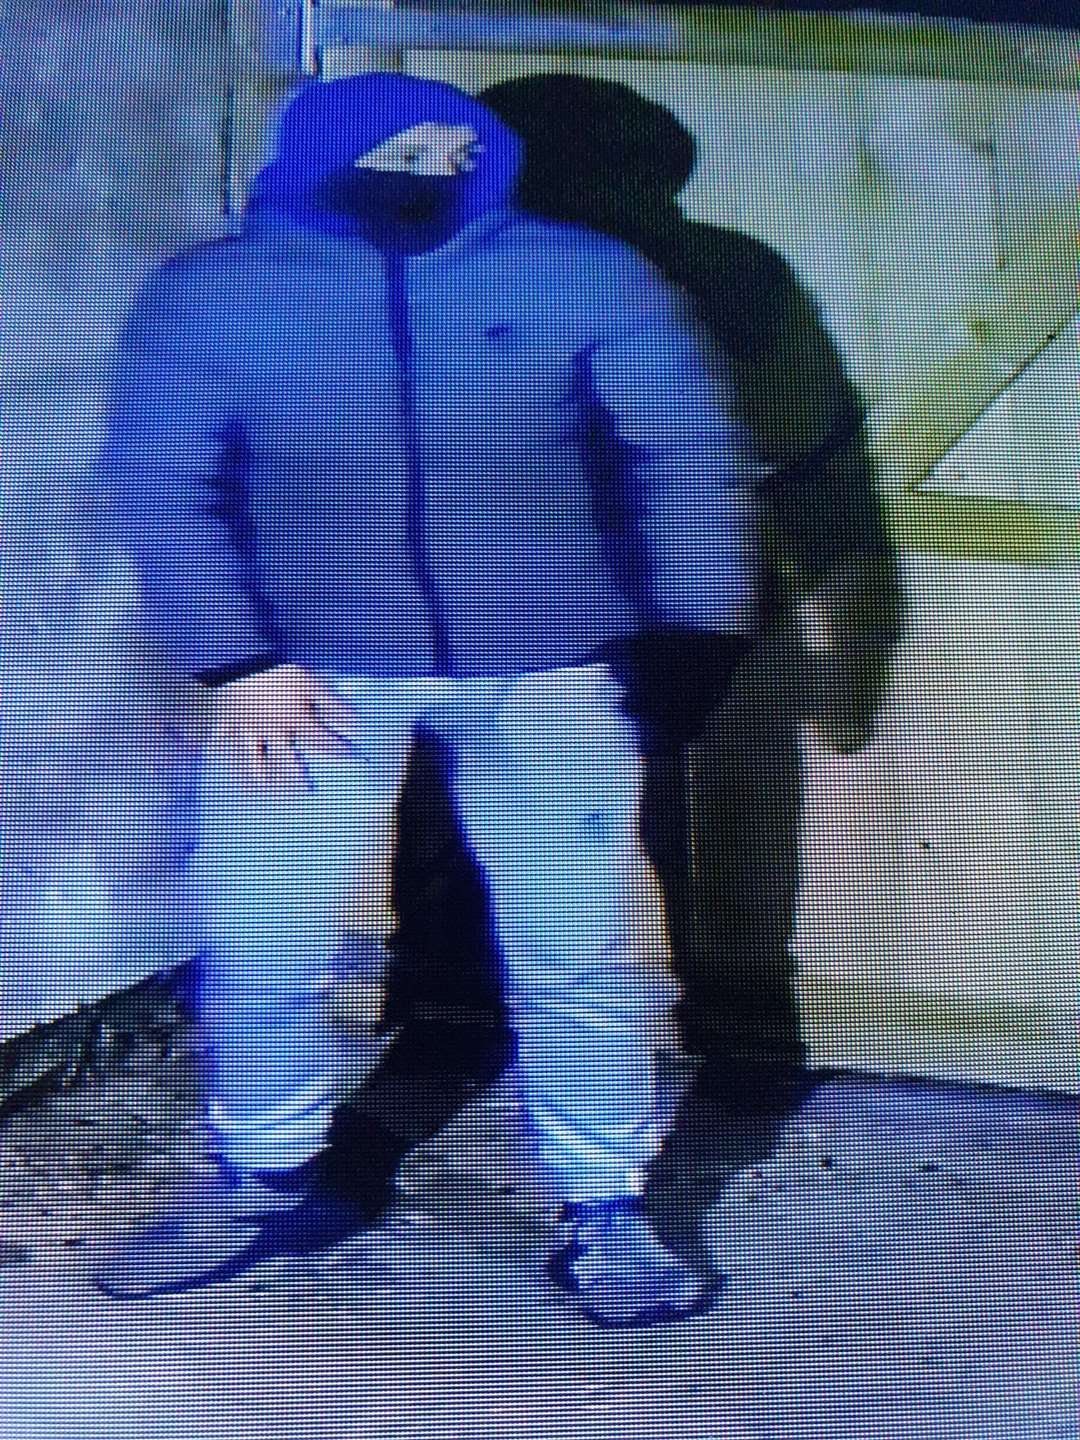 CCTV shows teenagers breaking into Newington Fish Bar. Images from Newington Fish Bar (55420586)